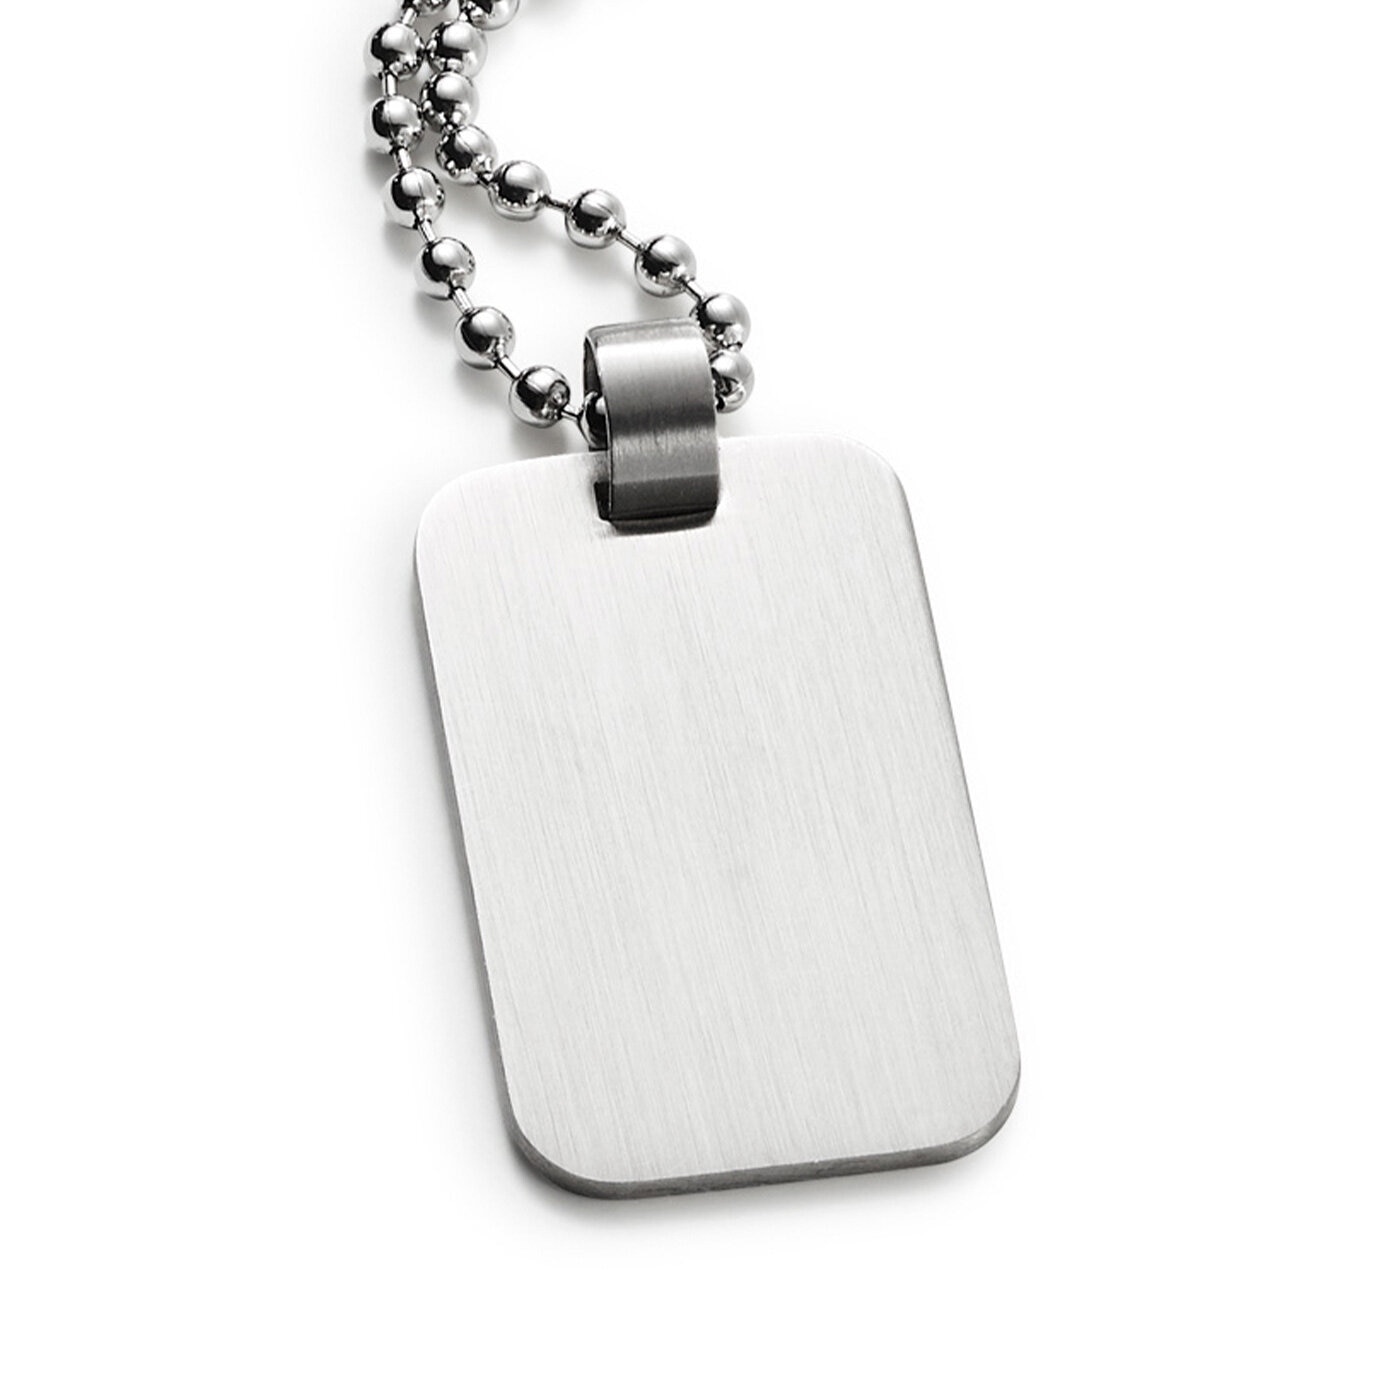 Steel tag necklace